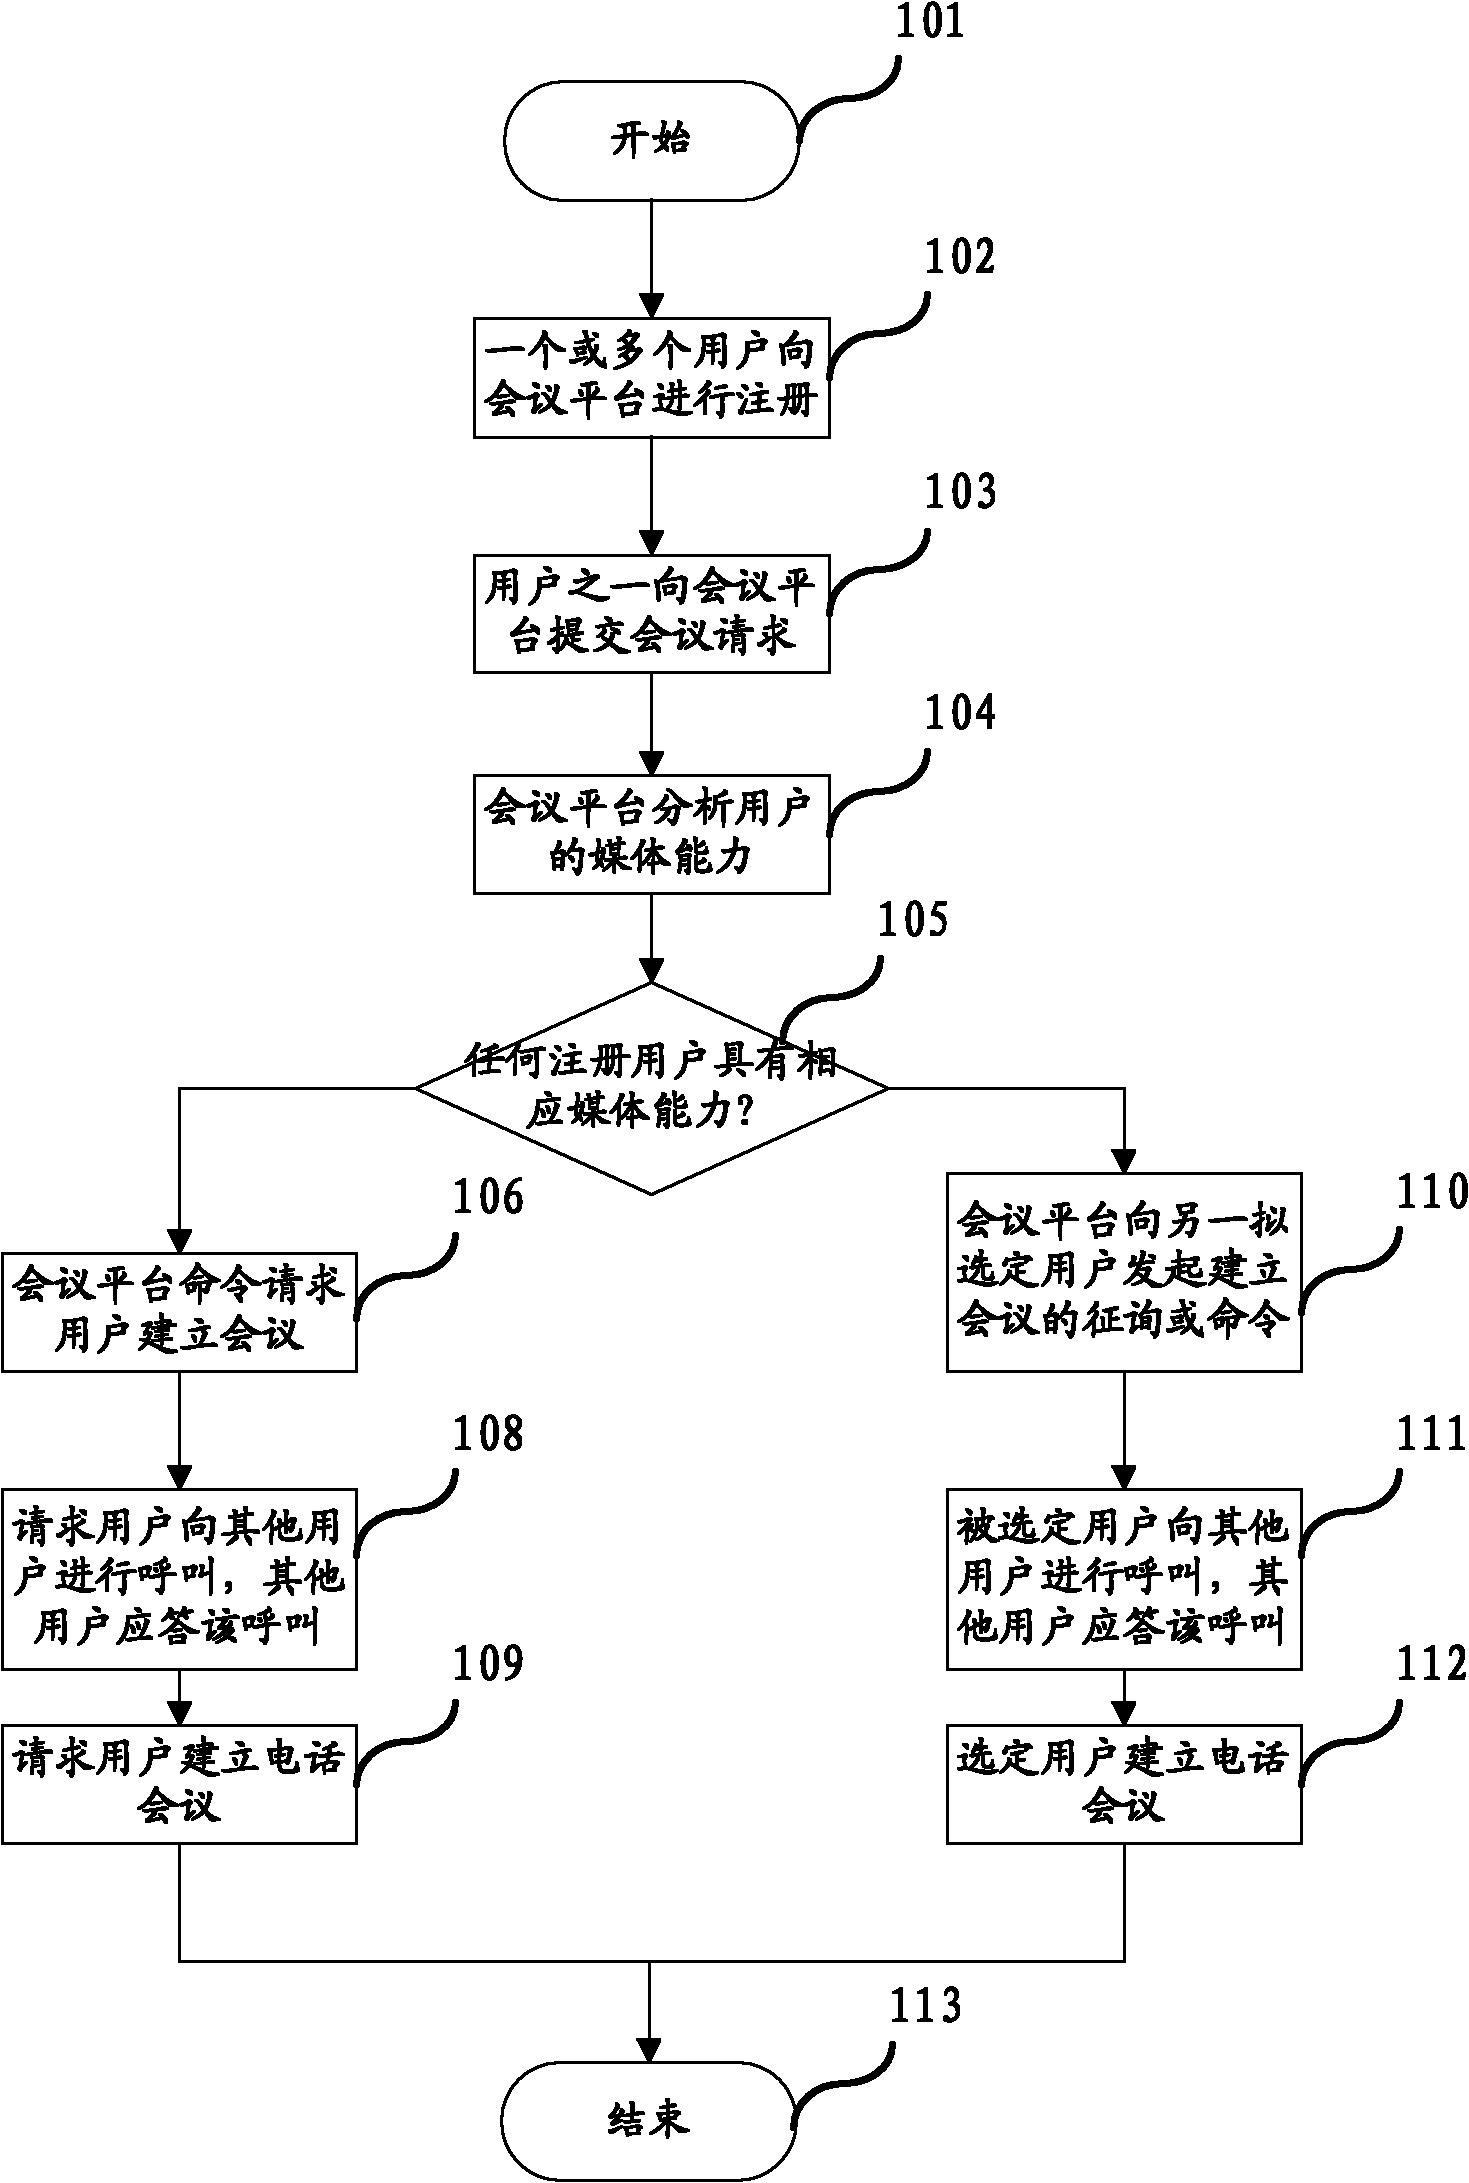 Internet protocol (IP)-based teleconference service method and system